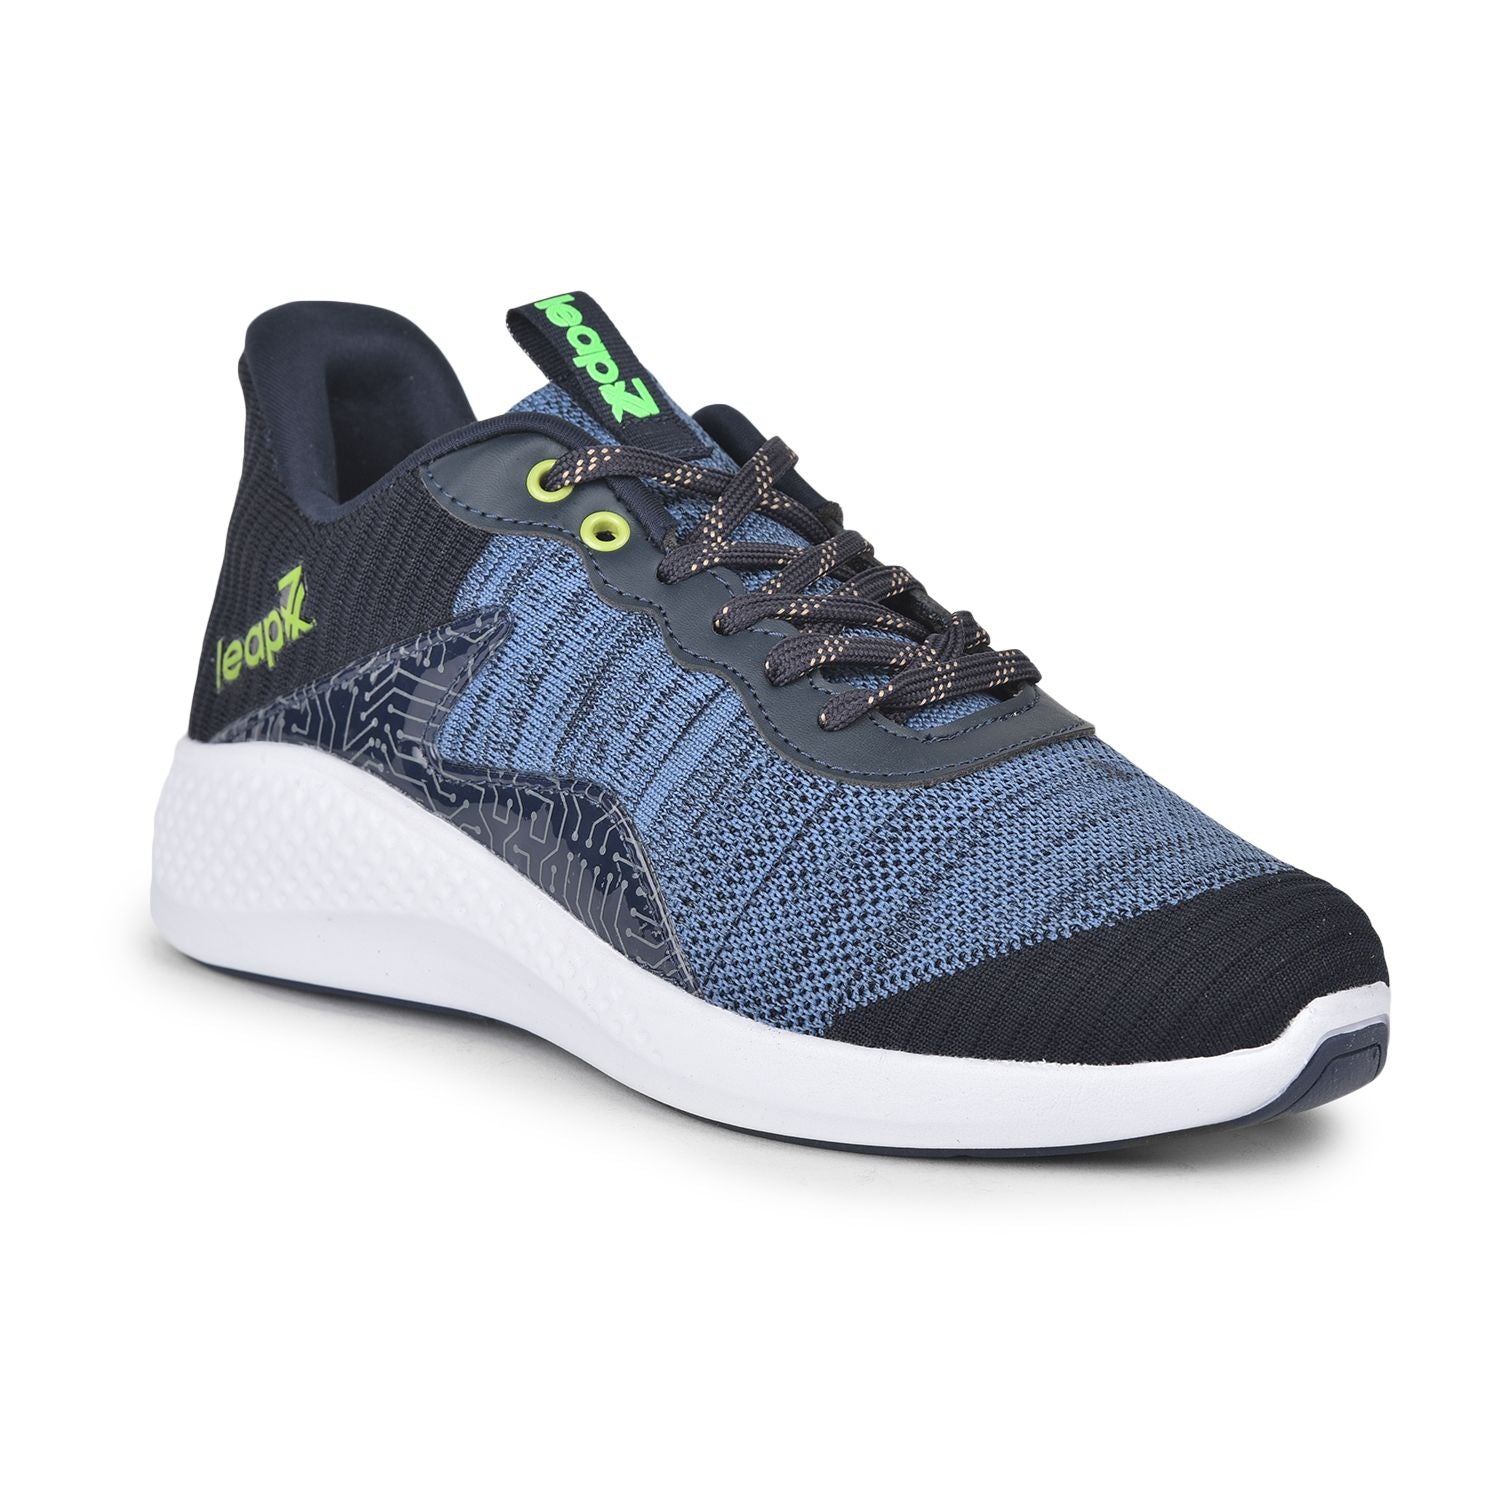 LEAP7X By Liberty Sports Shoes For MENS (61270021) | Book Bargain Buy